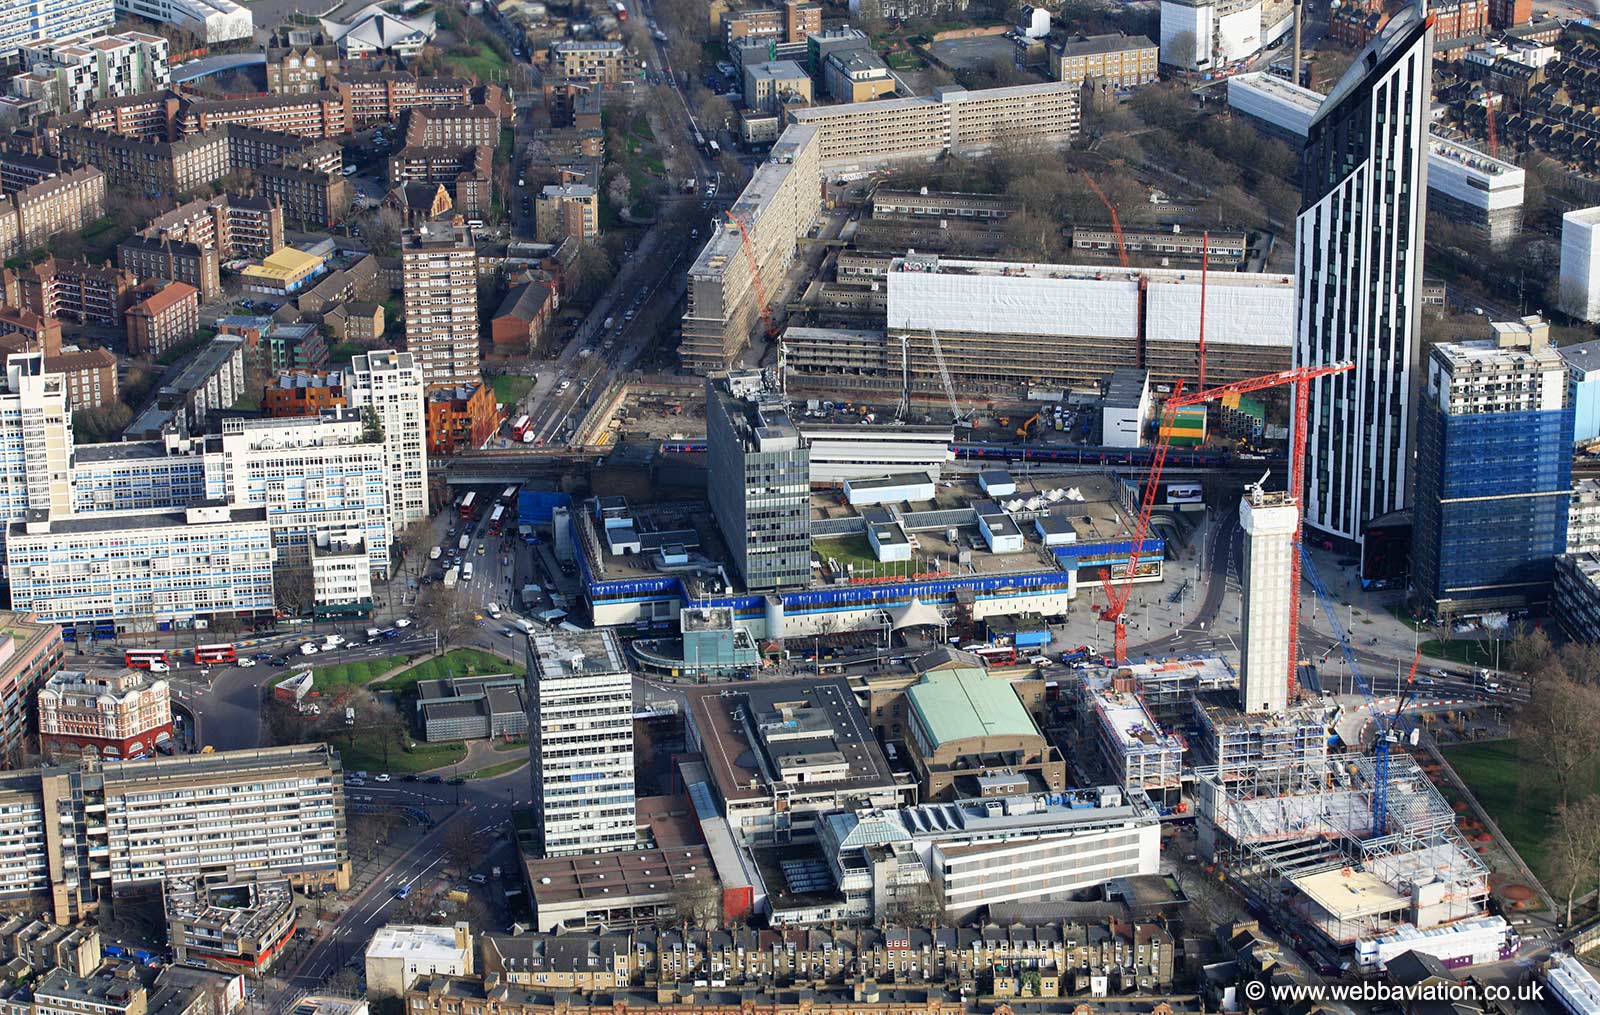 Elephant & Castle Shopping Centre London from the air